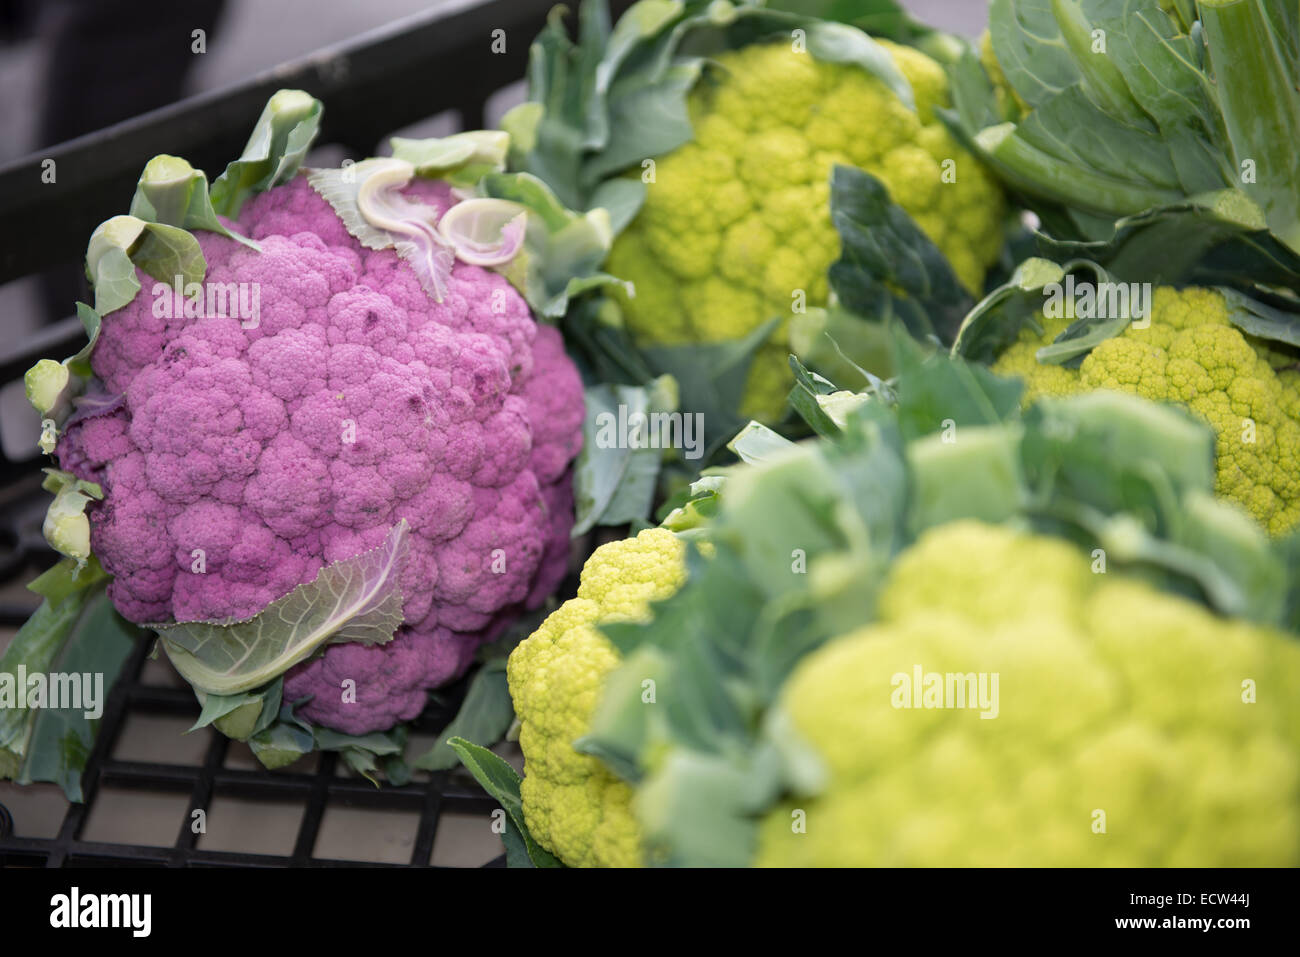 Different kinds of vegetables in a street market in Union Square, Manhattan, New York City, NY, USA. Stock Photo